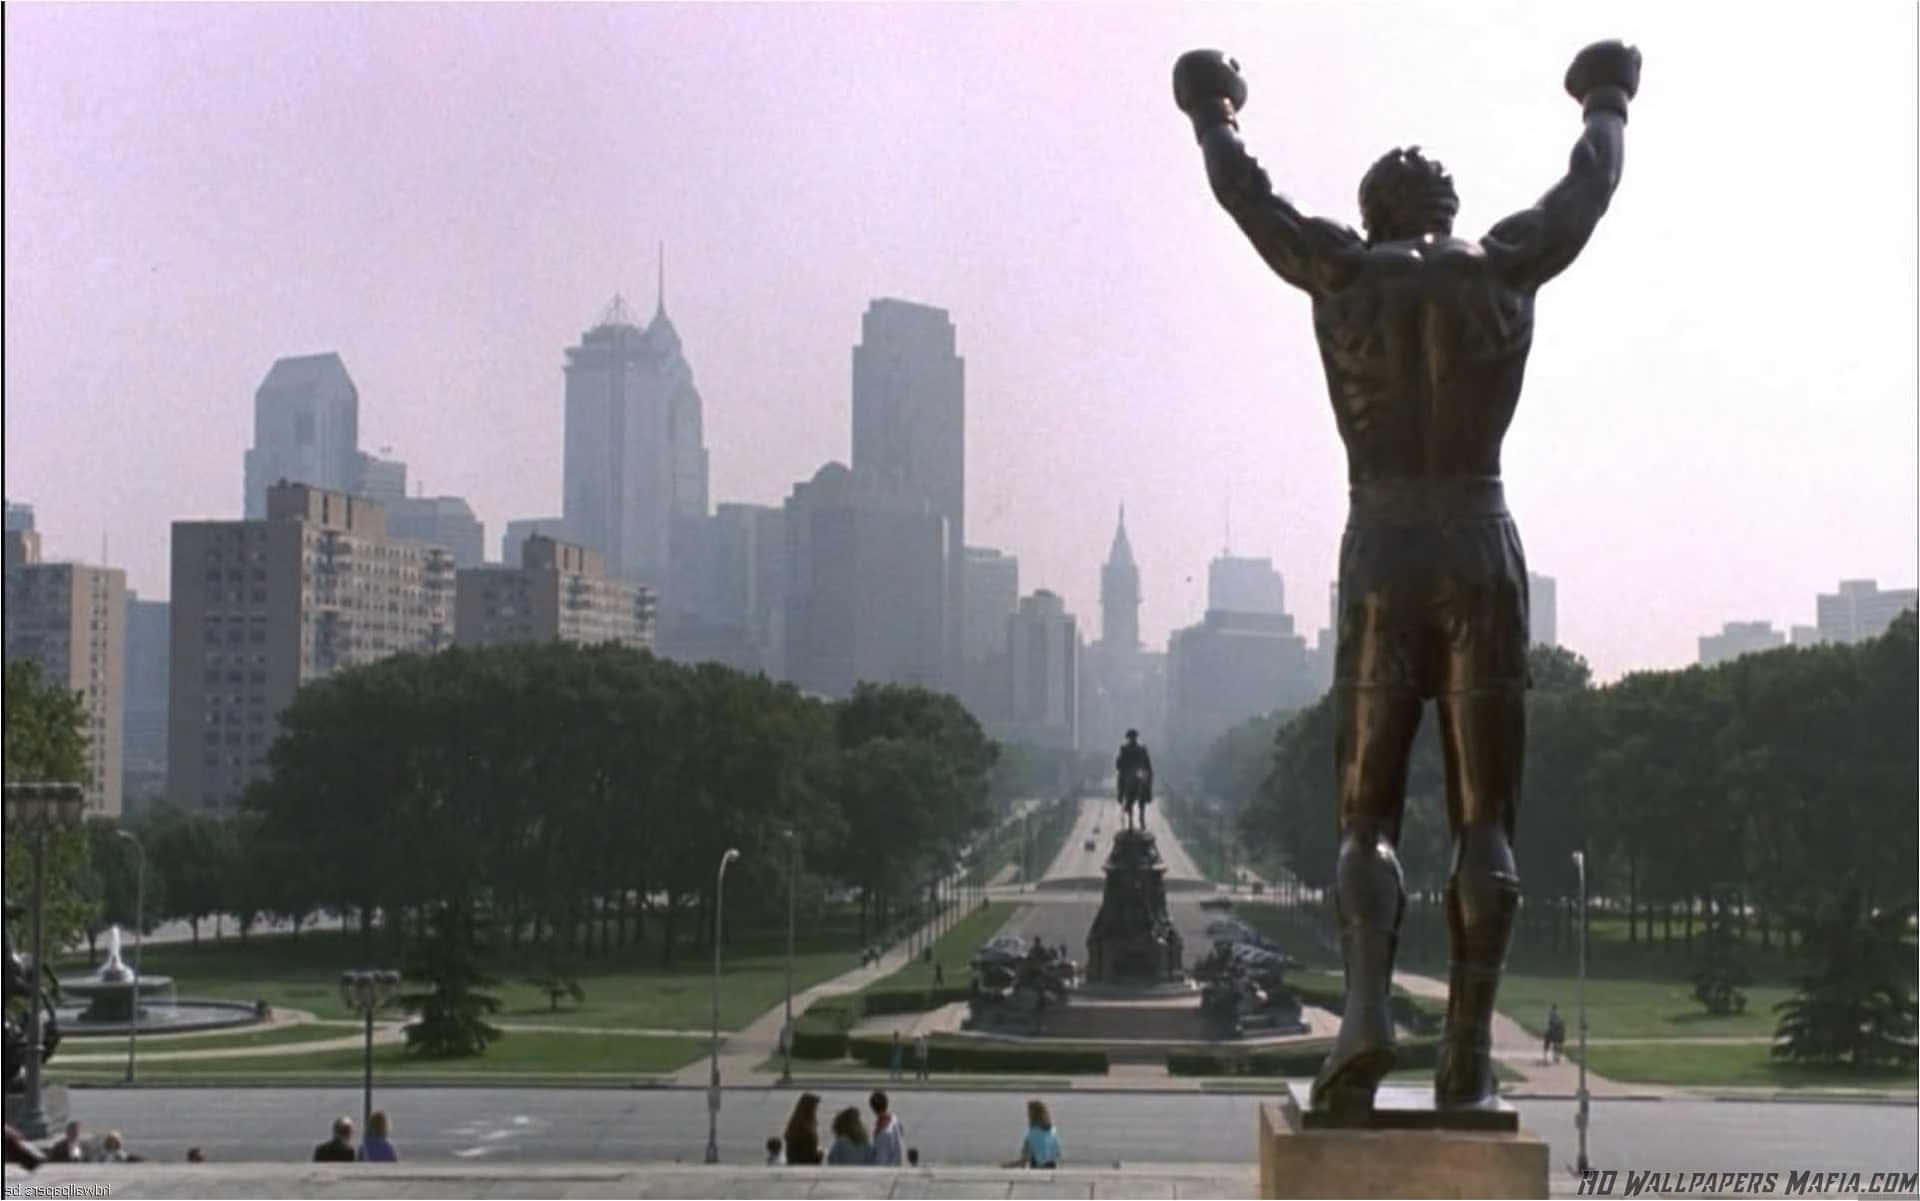 Rocky Balboa Shows Off His Iconic American Flag Shorts In Preparation For The Fight. Wallpaper